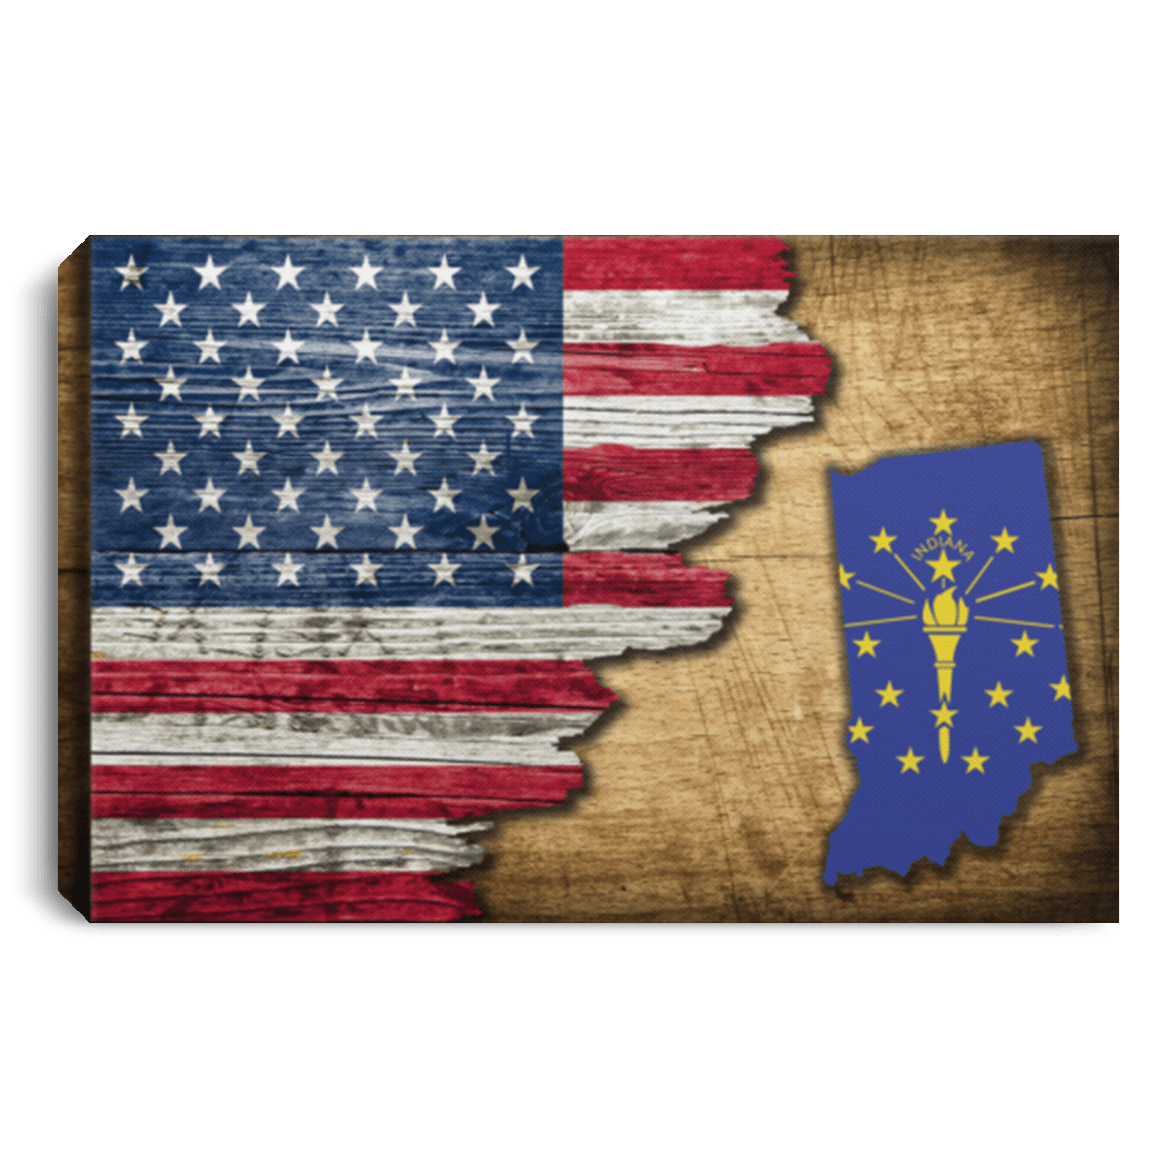 United States/Indiana Flag Ripped Effect 12X8 Inches Landscape Canvas .75In Frame